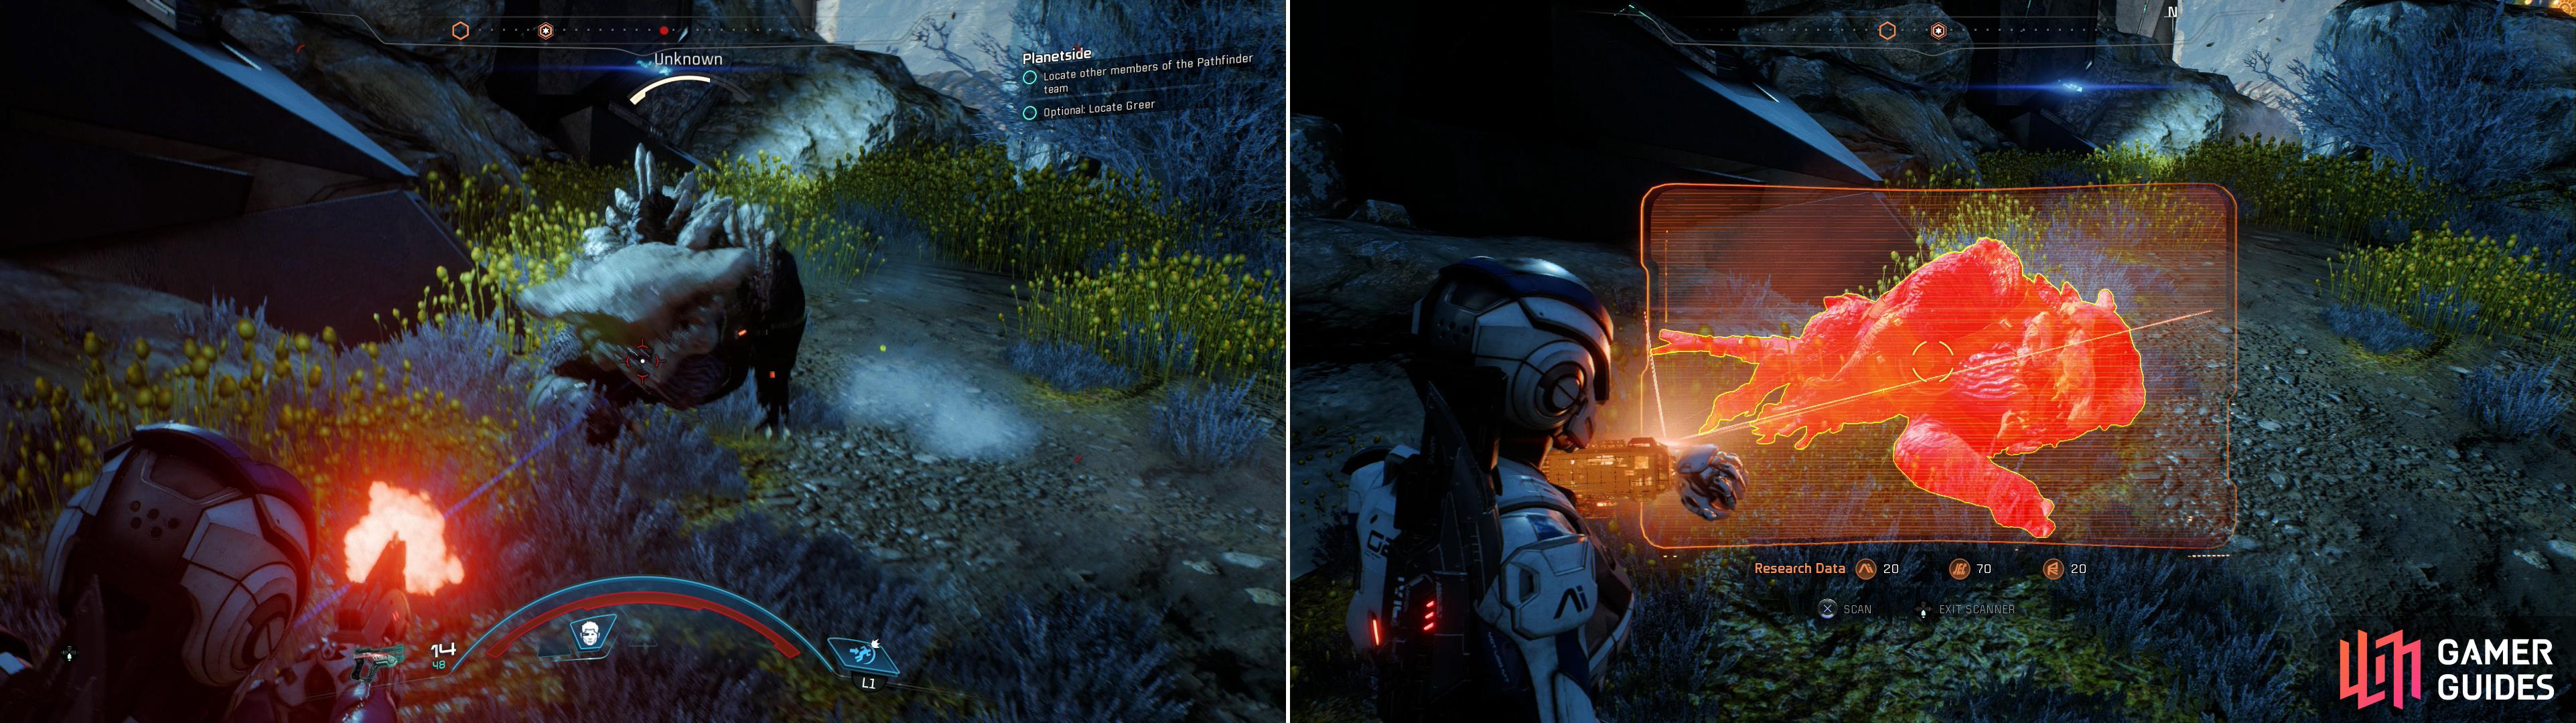 Be wary of a cloaked quadruped (left) which will attempt to ambush you. After it's dead, be sure to scan it (right) for a great deal of Heleus Research Data.